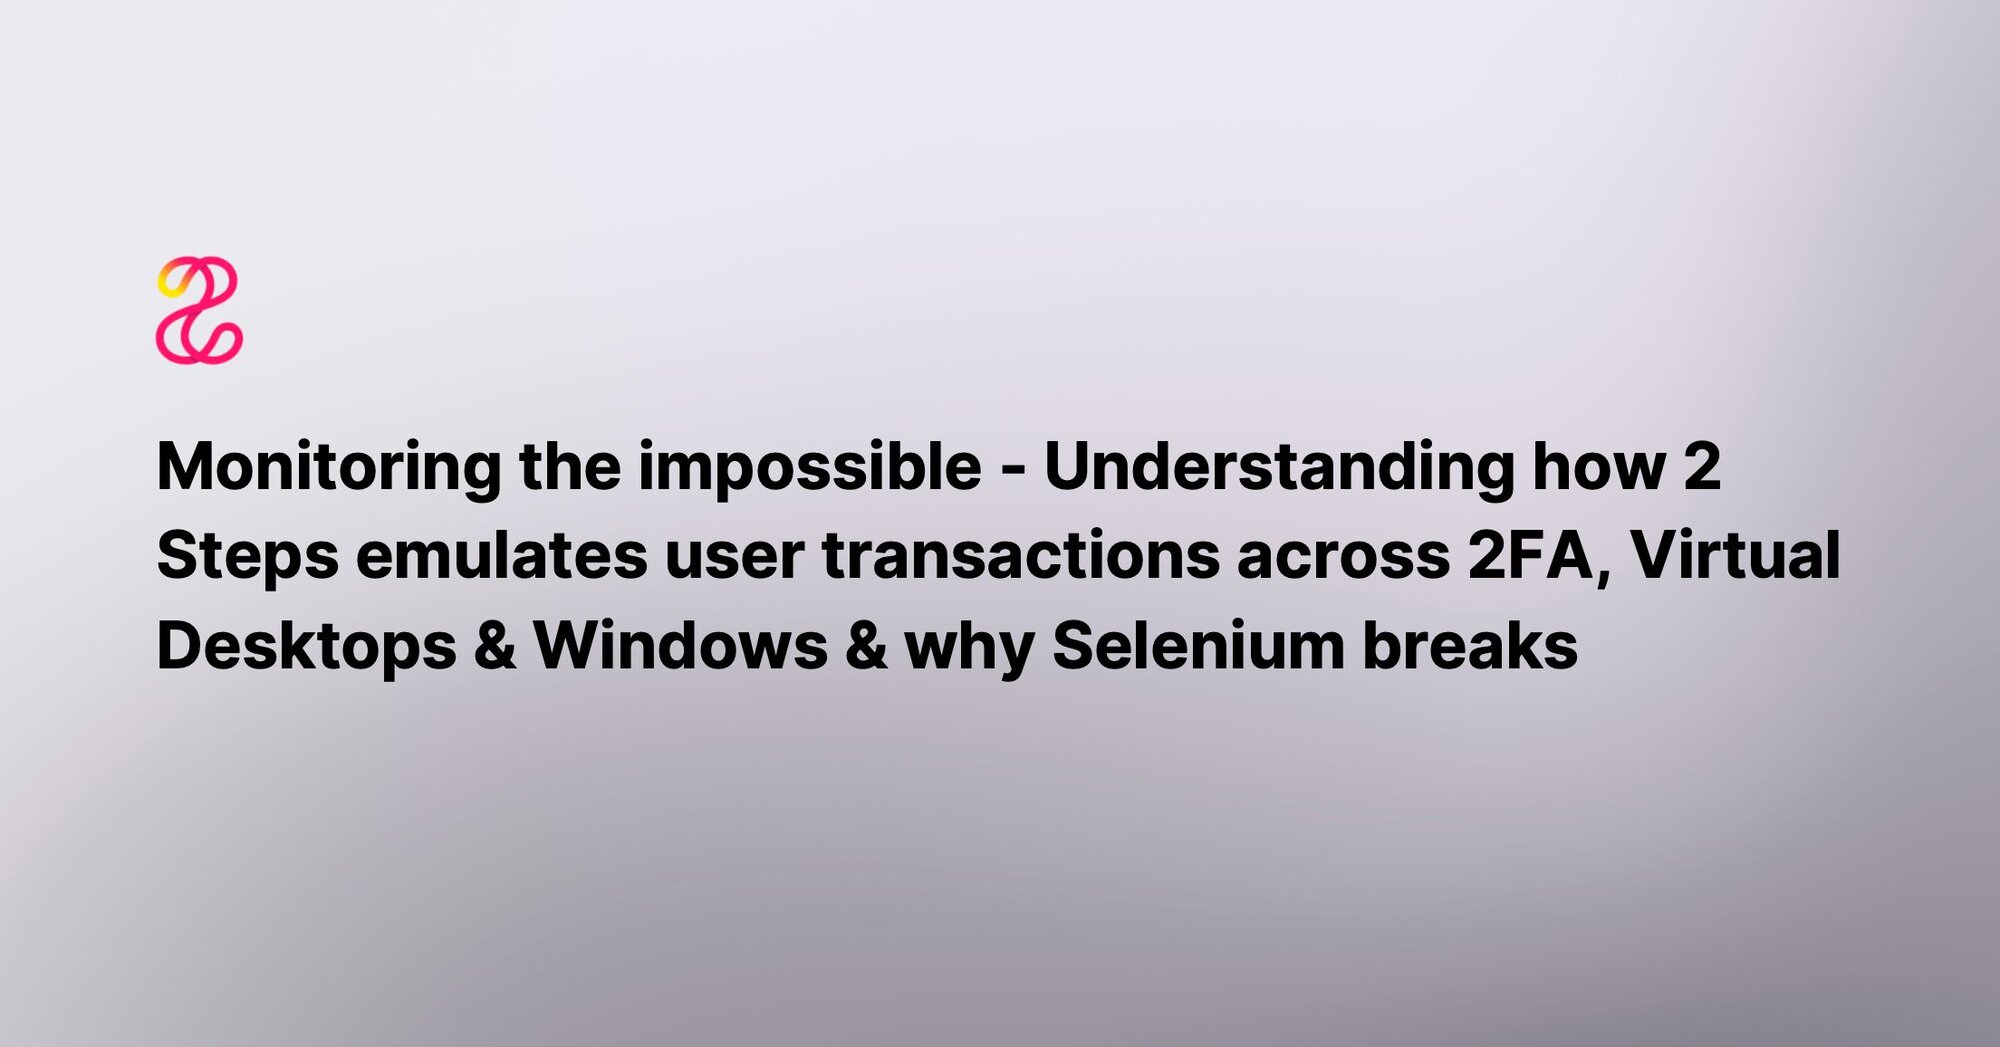 Monitoring the impossible - Understanding how 2 Steps emulates user transactions across 2FA/MFA, Citrix & Windows & why Selenium breaks